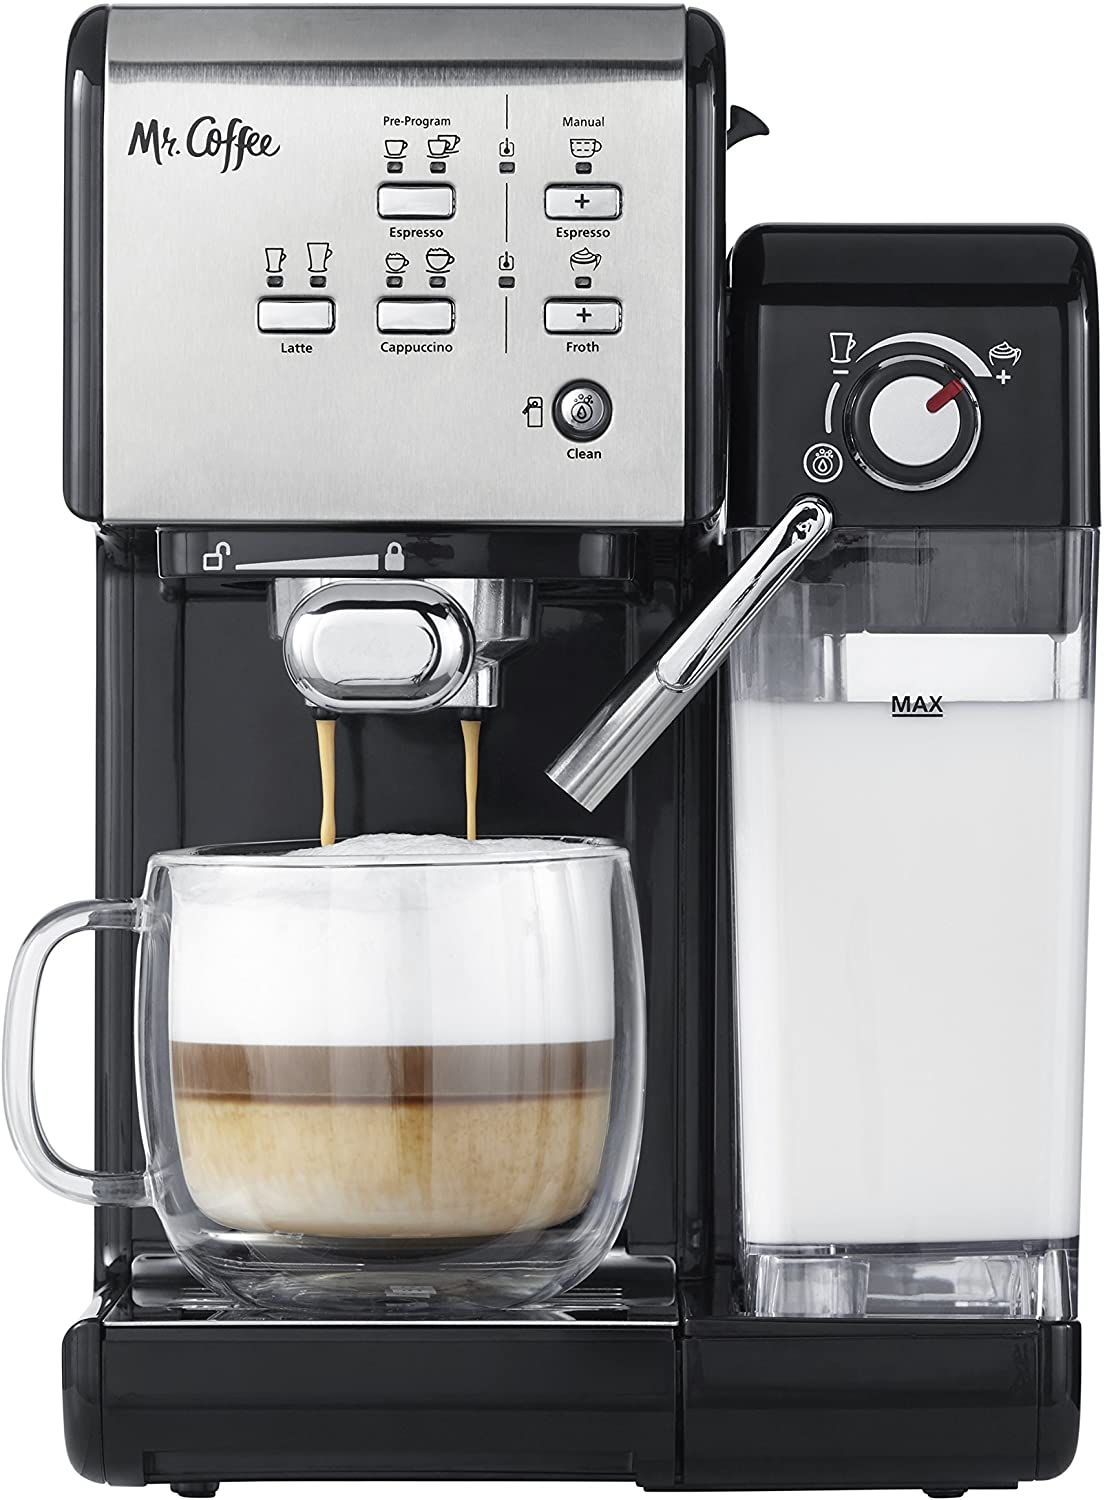 Mr Coffee One-Touch CoffeeHouse Espresso Maker and Cappuccino Machine Review